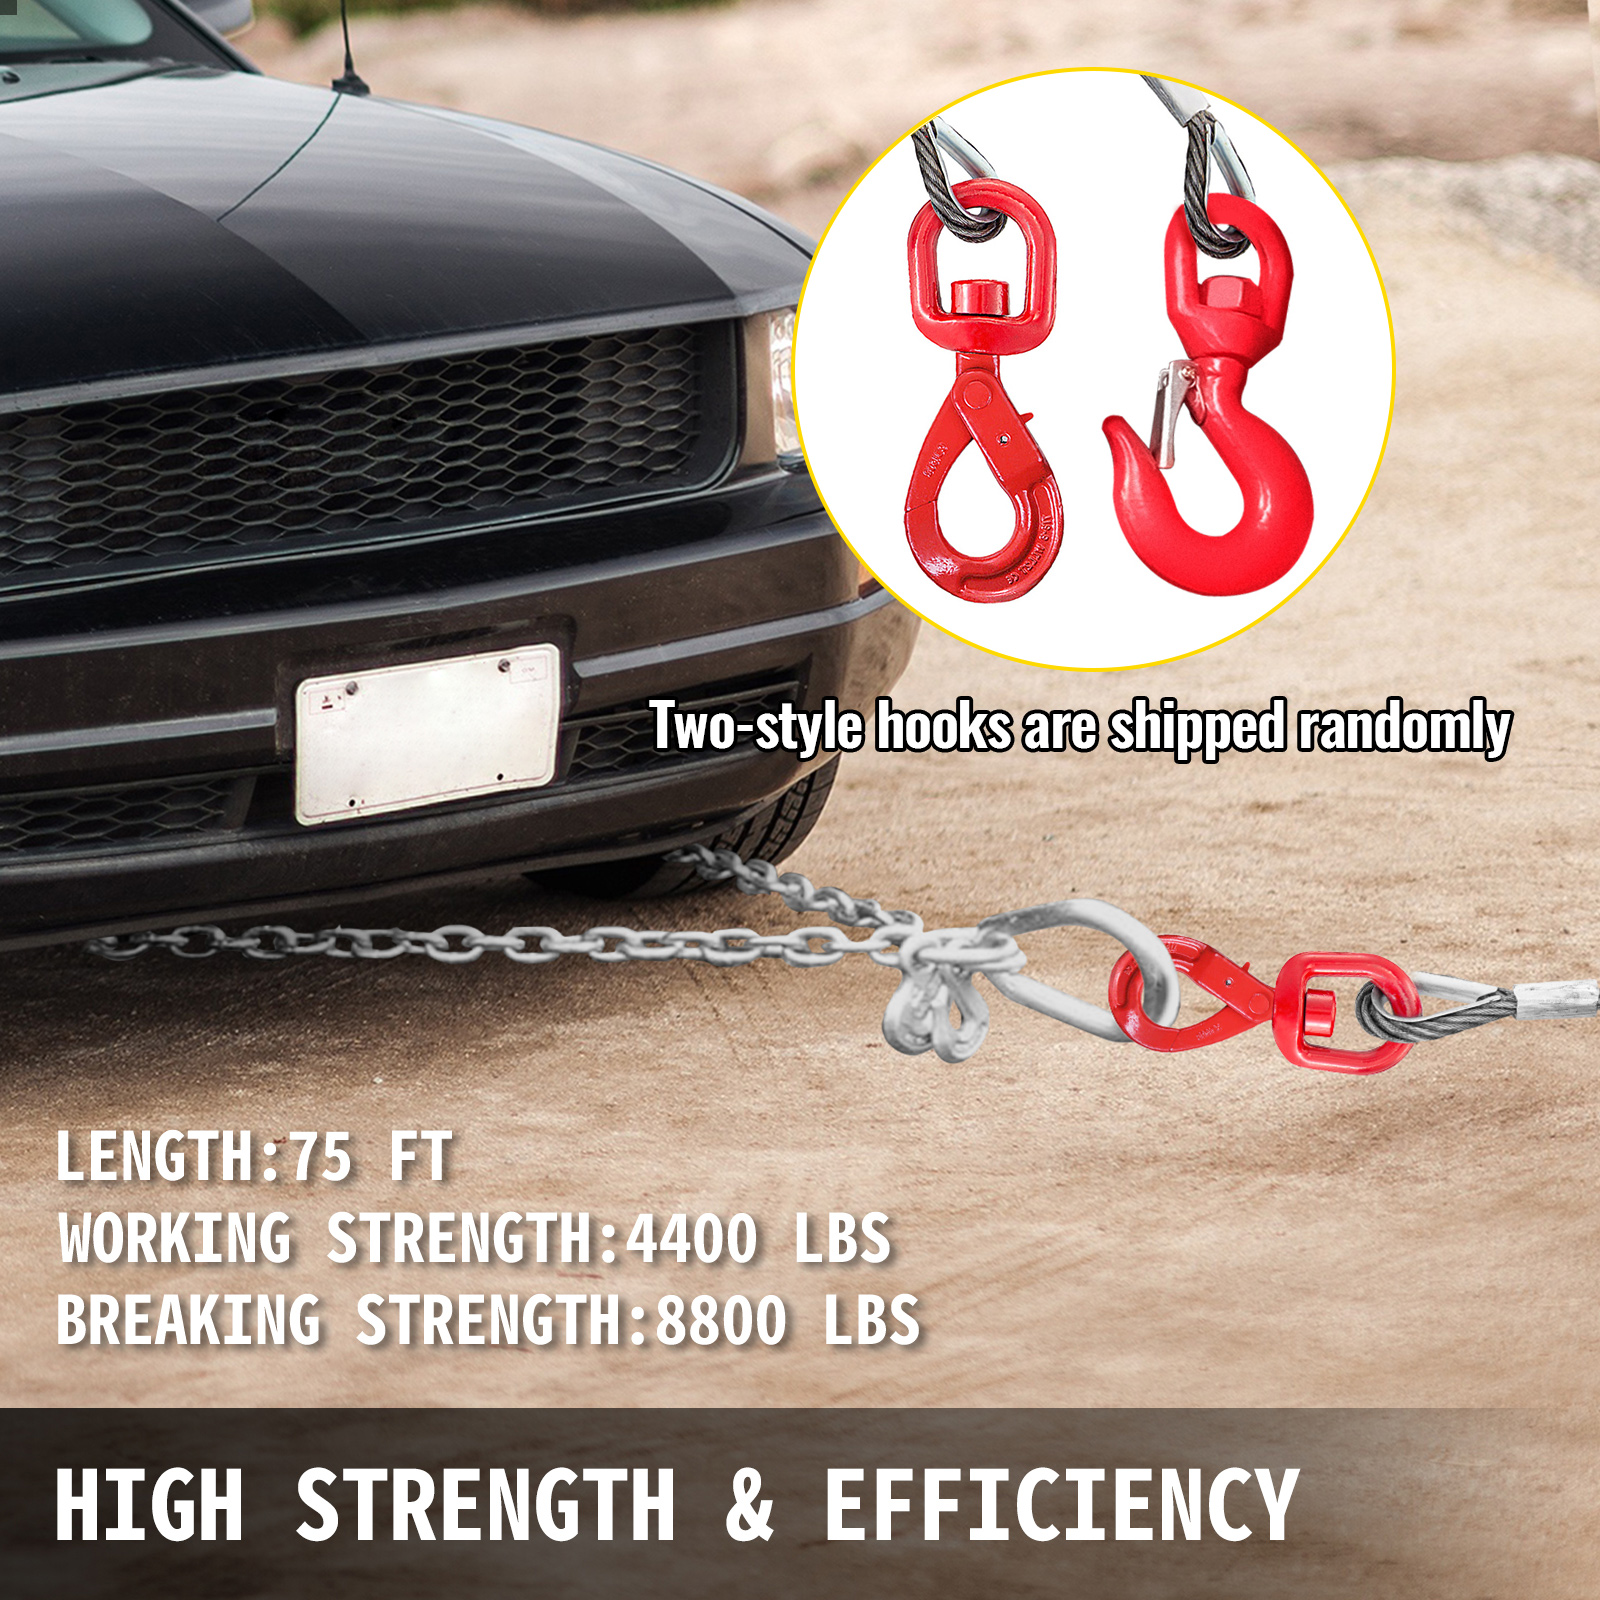 https://d2qc09rl1gfuof.cloudfront.net/product/2T23MGSSG00000001/steel-winch-cable-m100-2.jpg